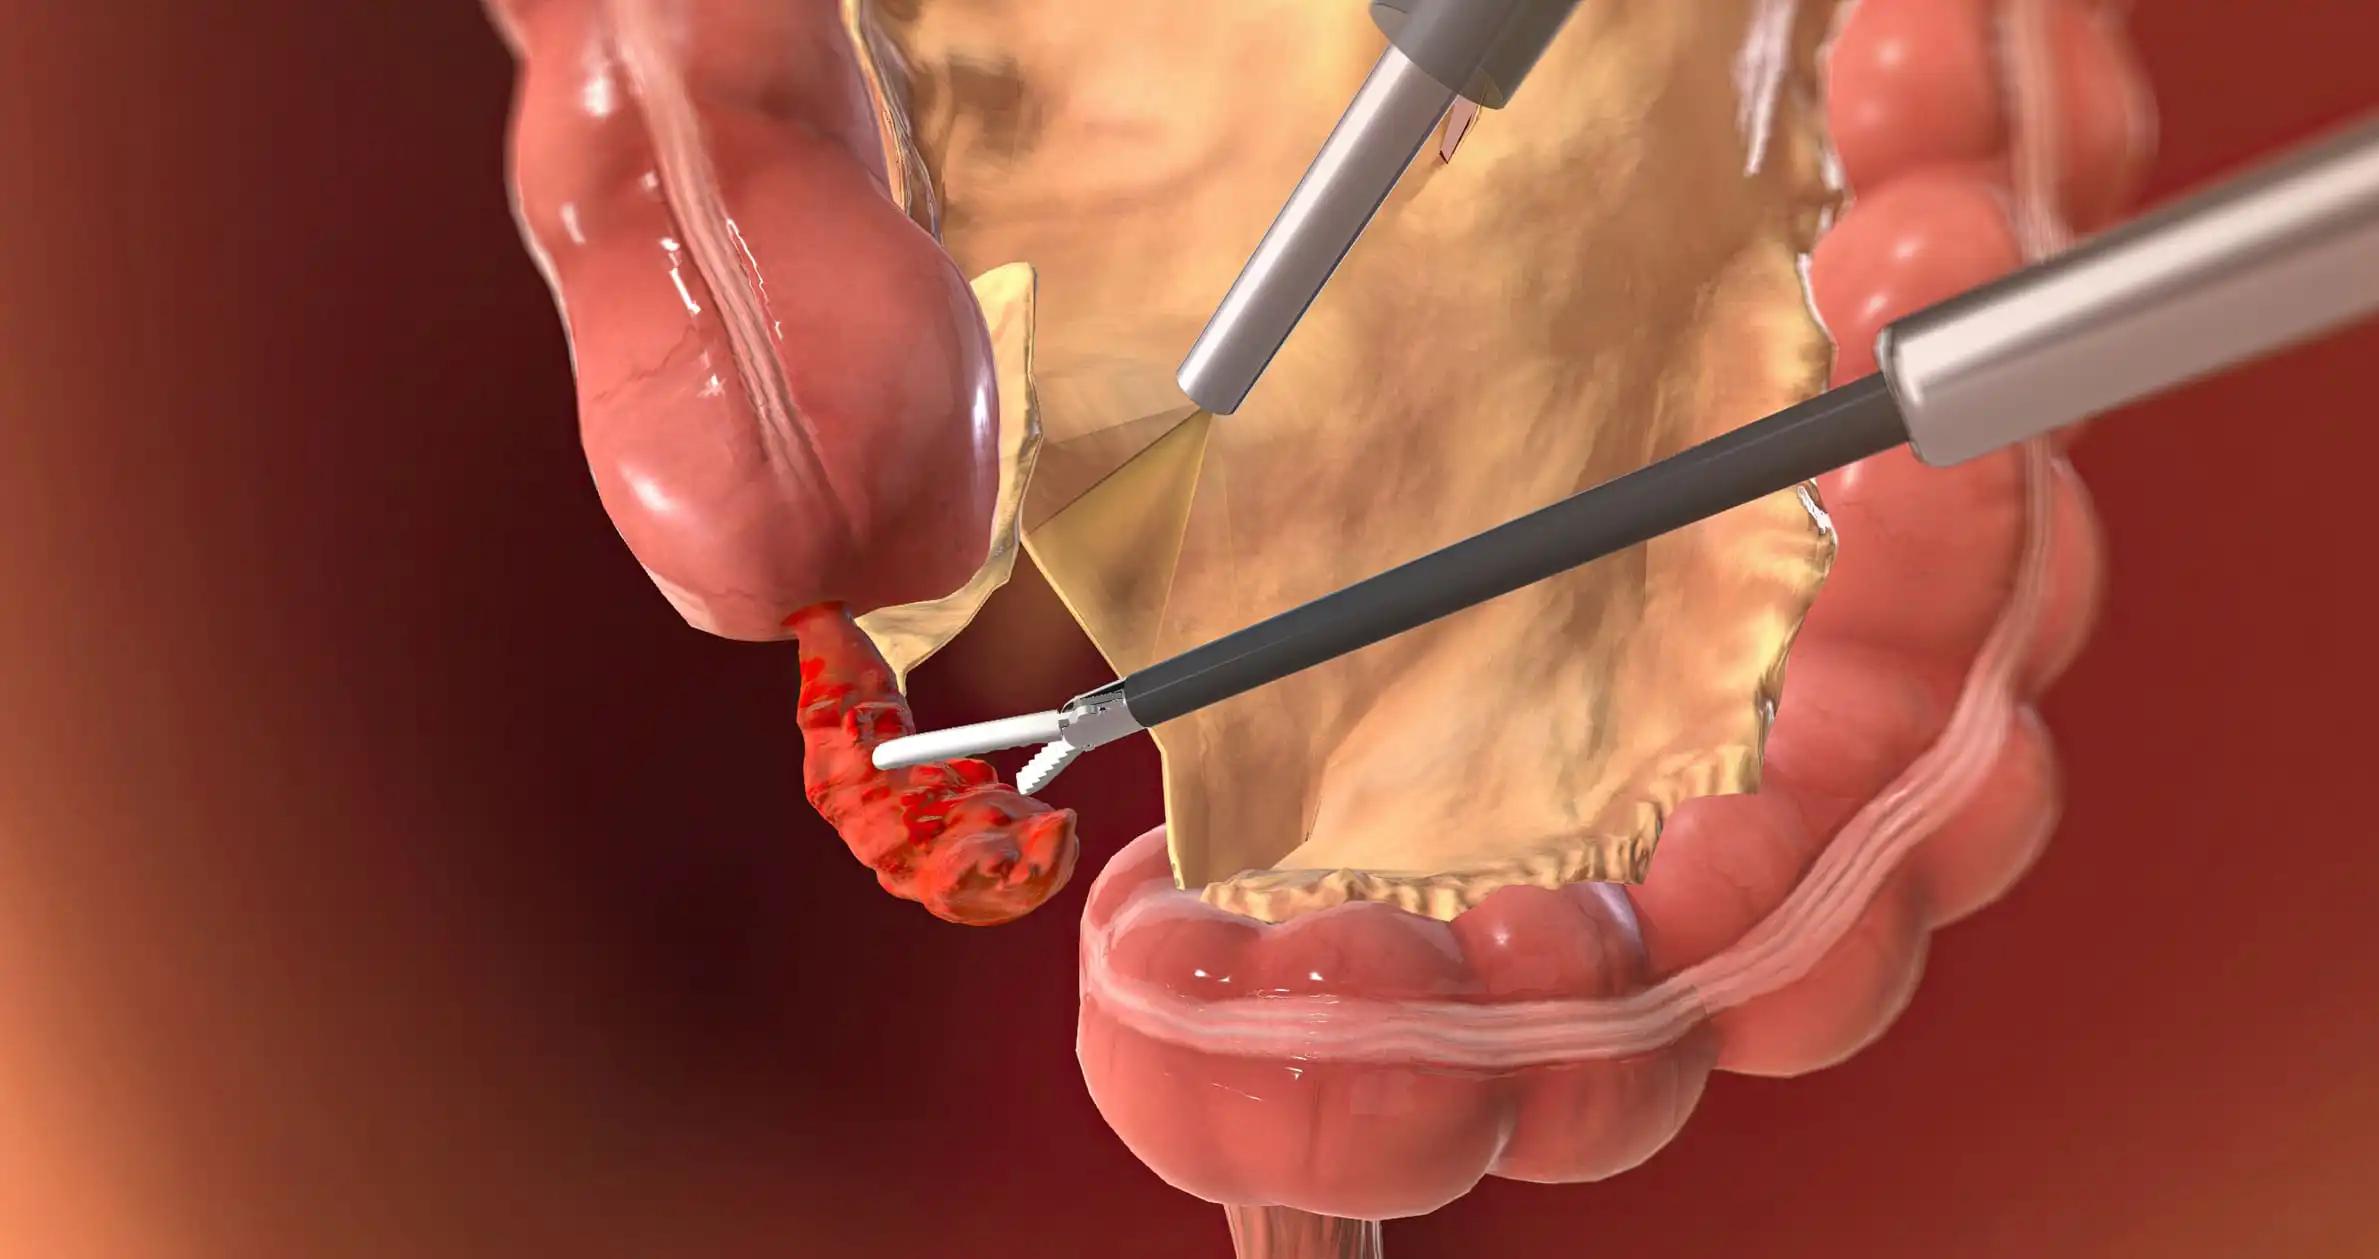 Treatment of Colorectal Cancer